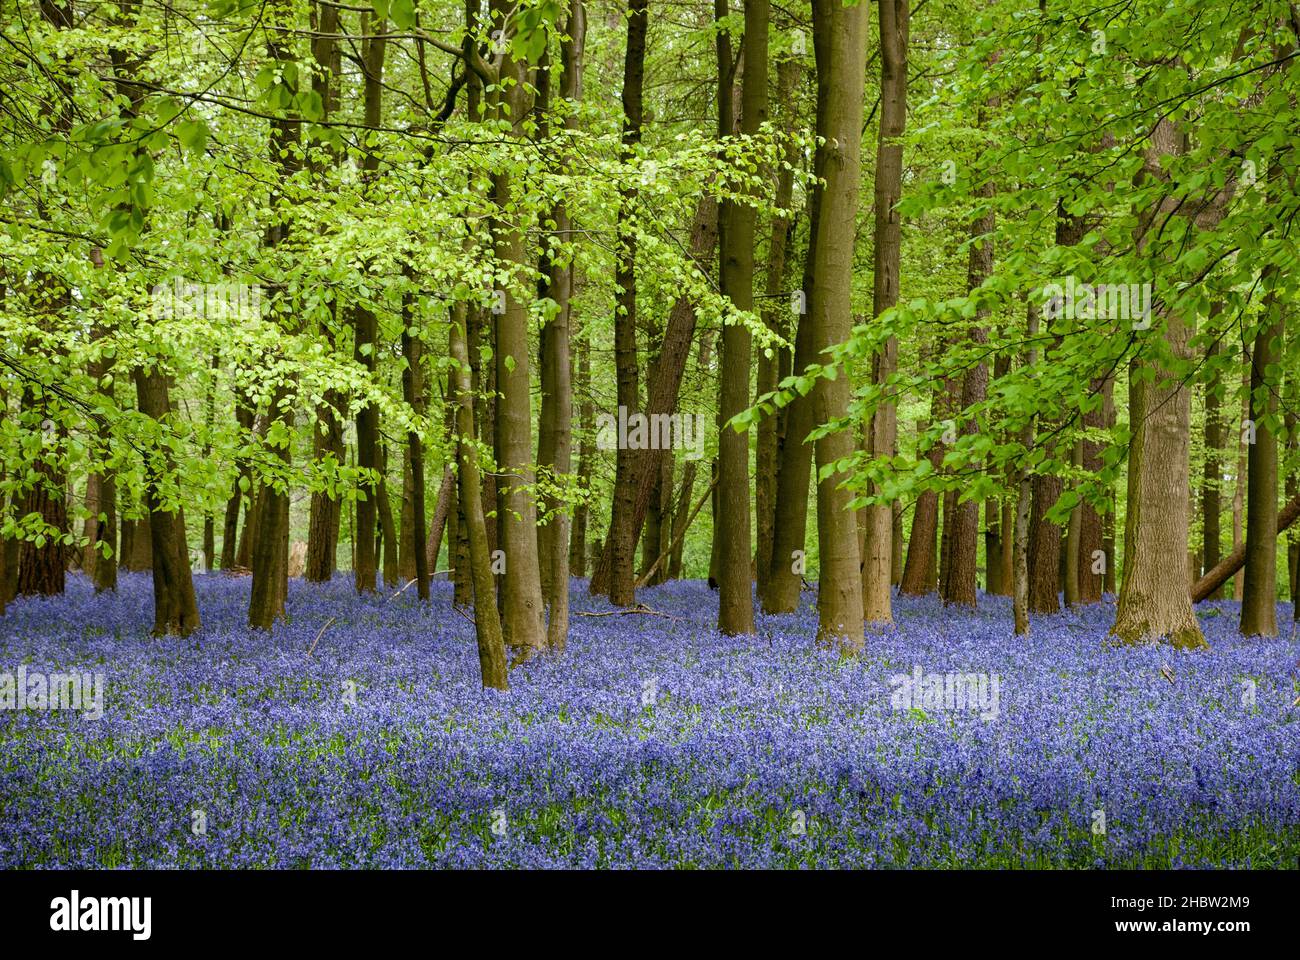 UK, England, Hertfordshire. A carpet of Bluebells in the spring under new Beech Tree leaves. Stock Photo